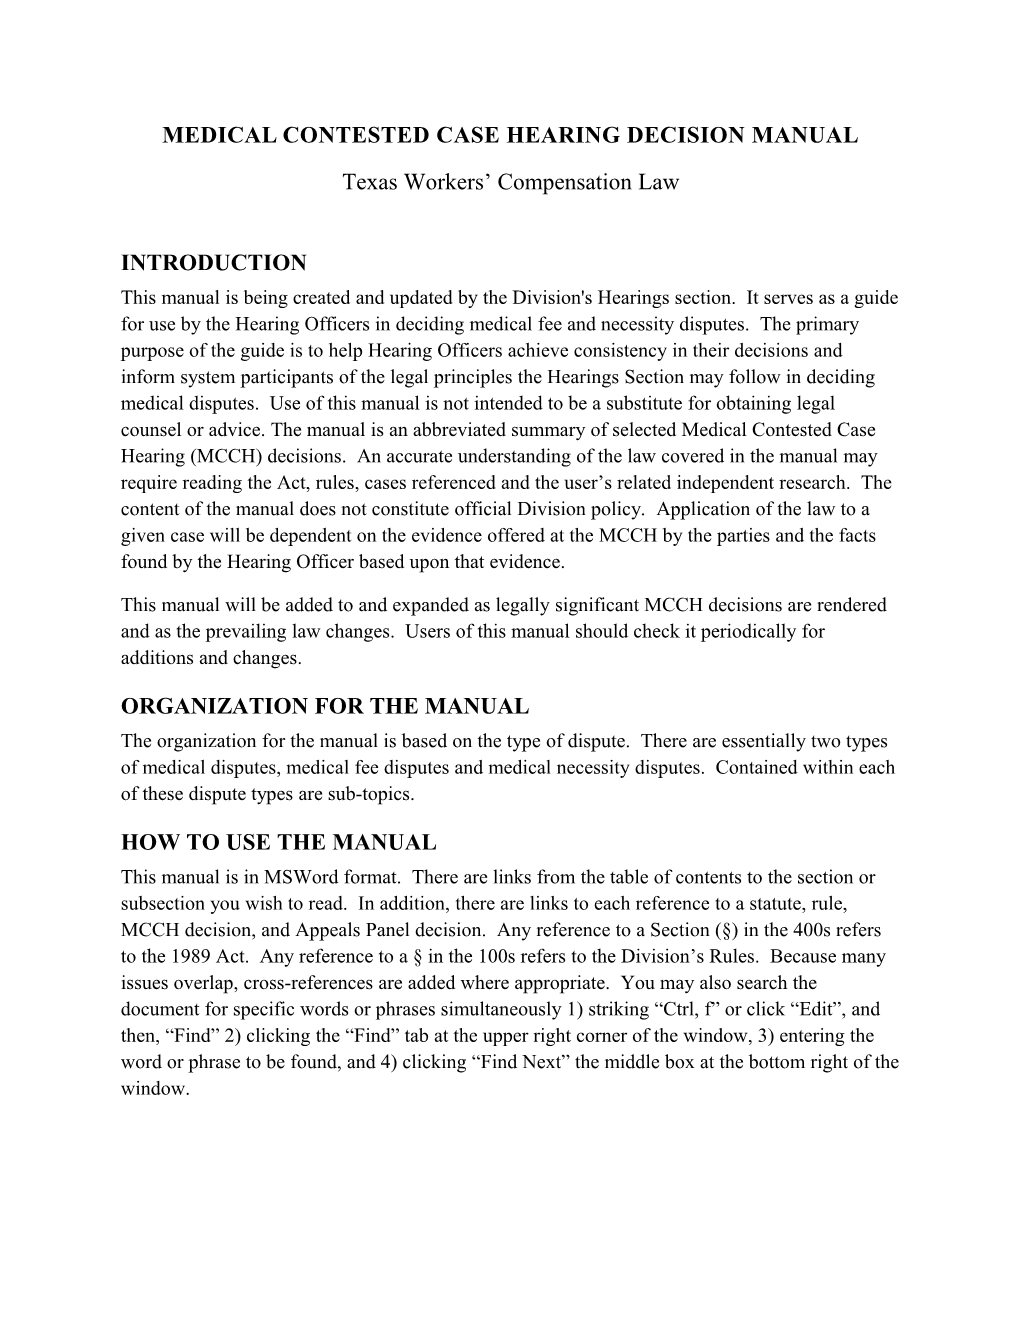 Medical Contested Case Hearing Decision Manual